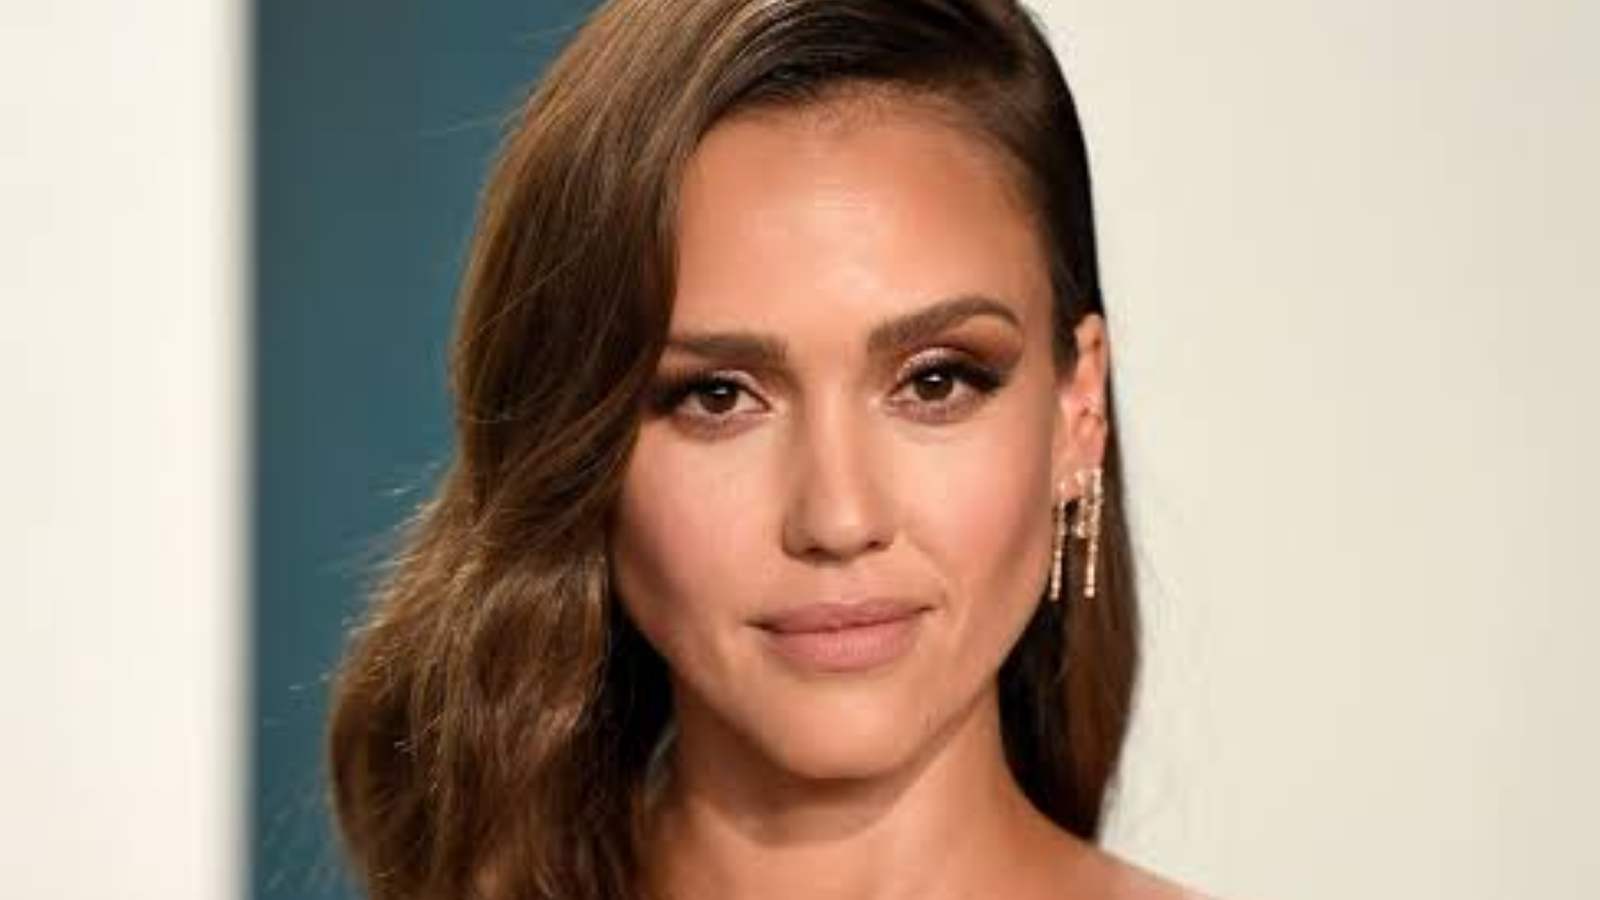 Jessica Alba Net Worth, Career, Endorsements, Charity, House, And More